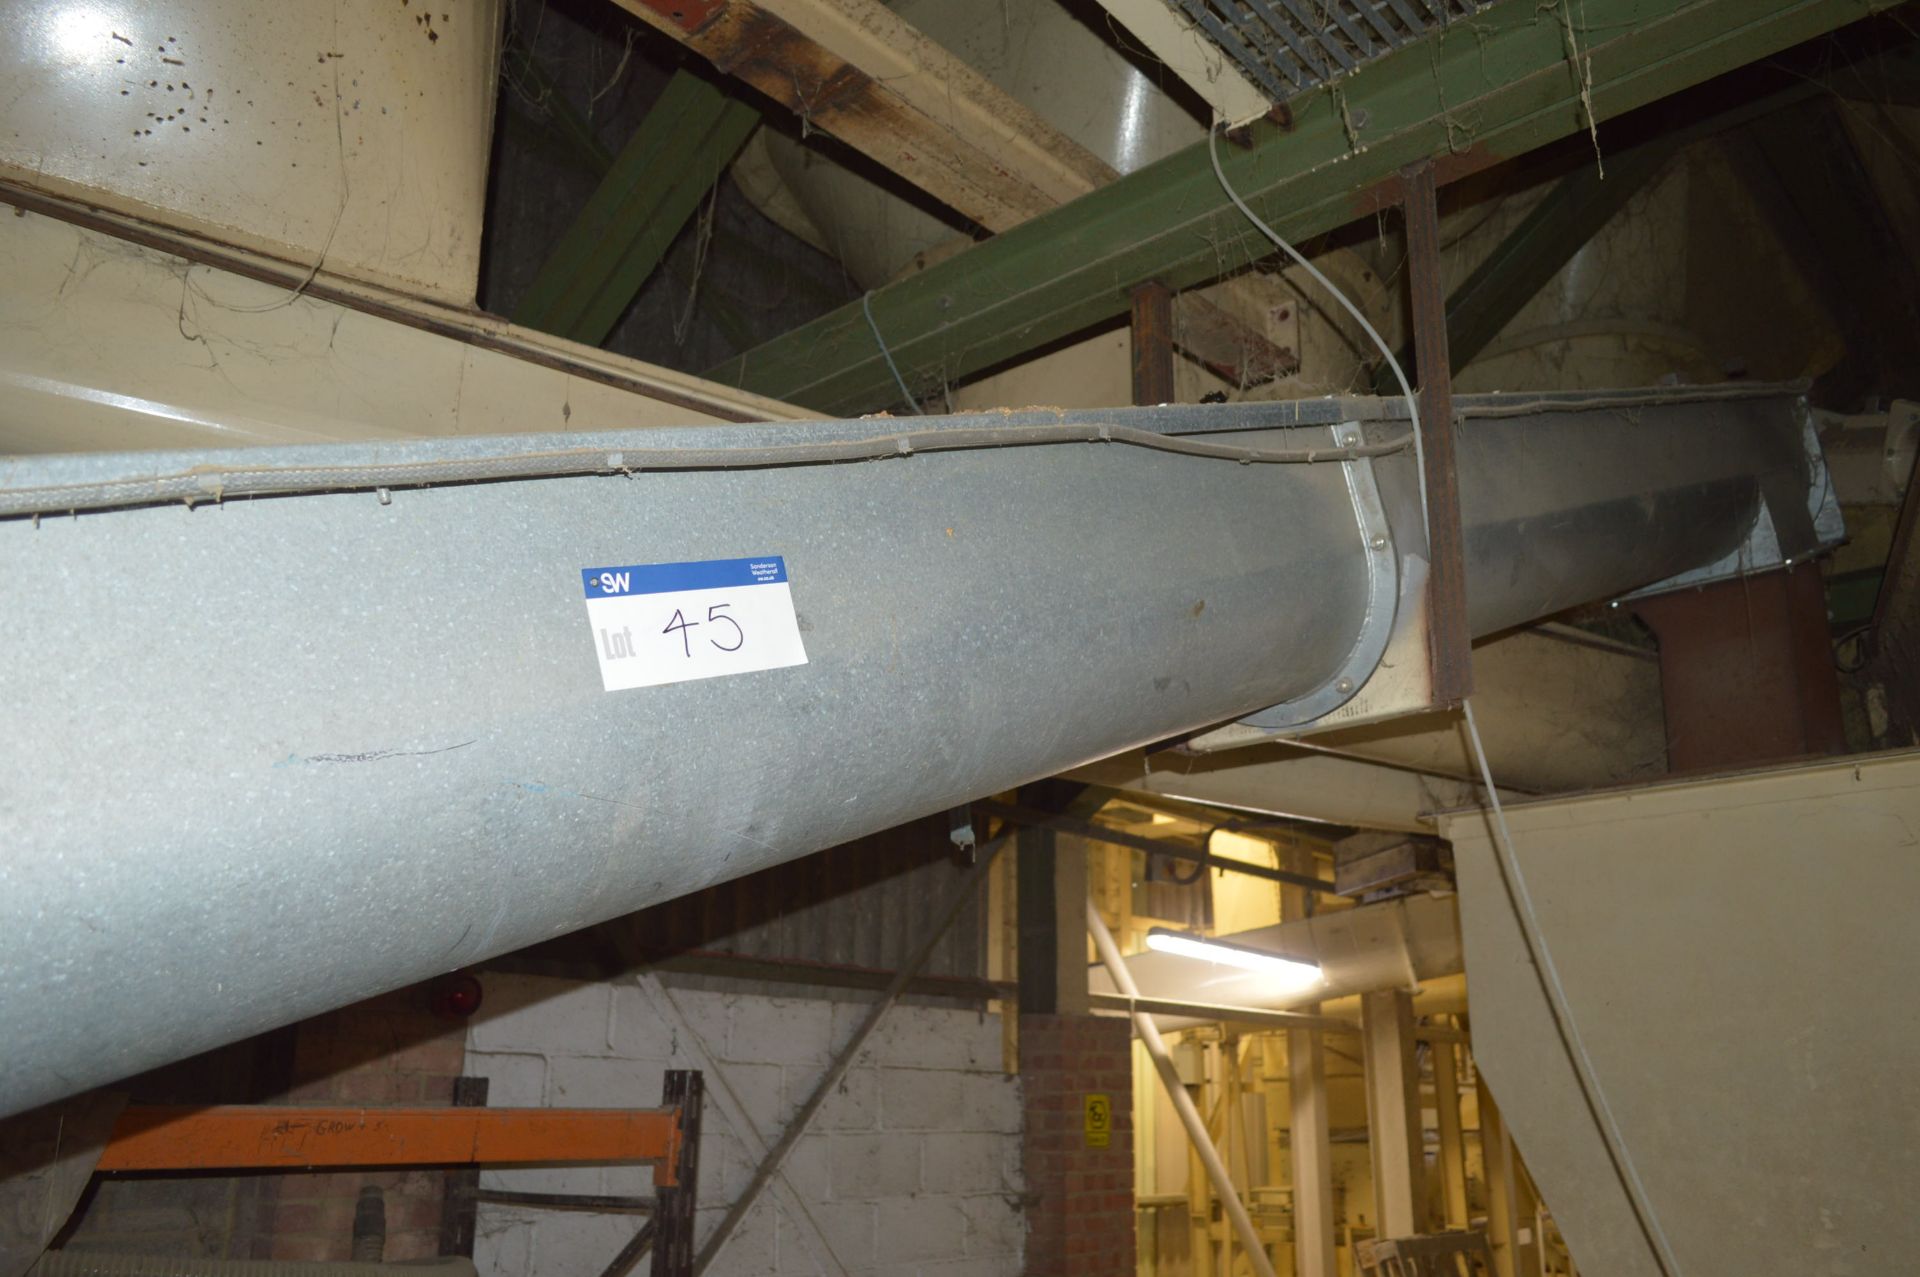 APPROX. 400mm dia. GALVANISED STEEL CASED INCLINED SCREW CONVEYOR, approx. 8.5m long, with - Bild 3 aus 3